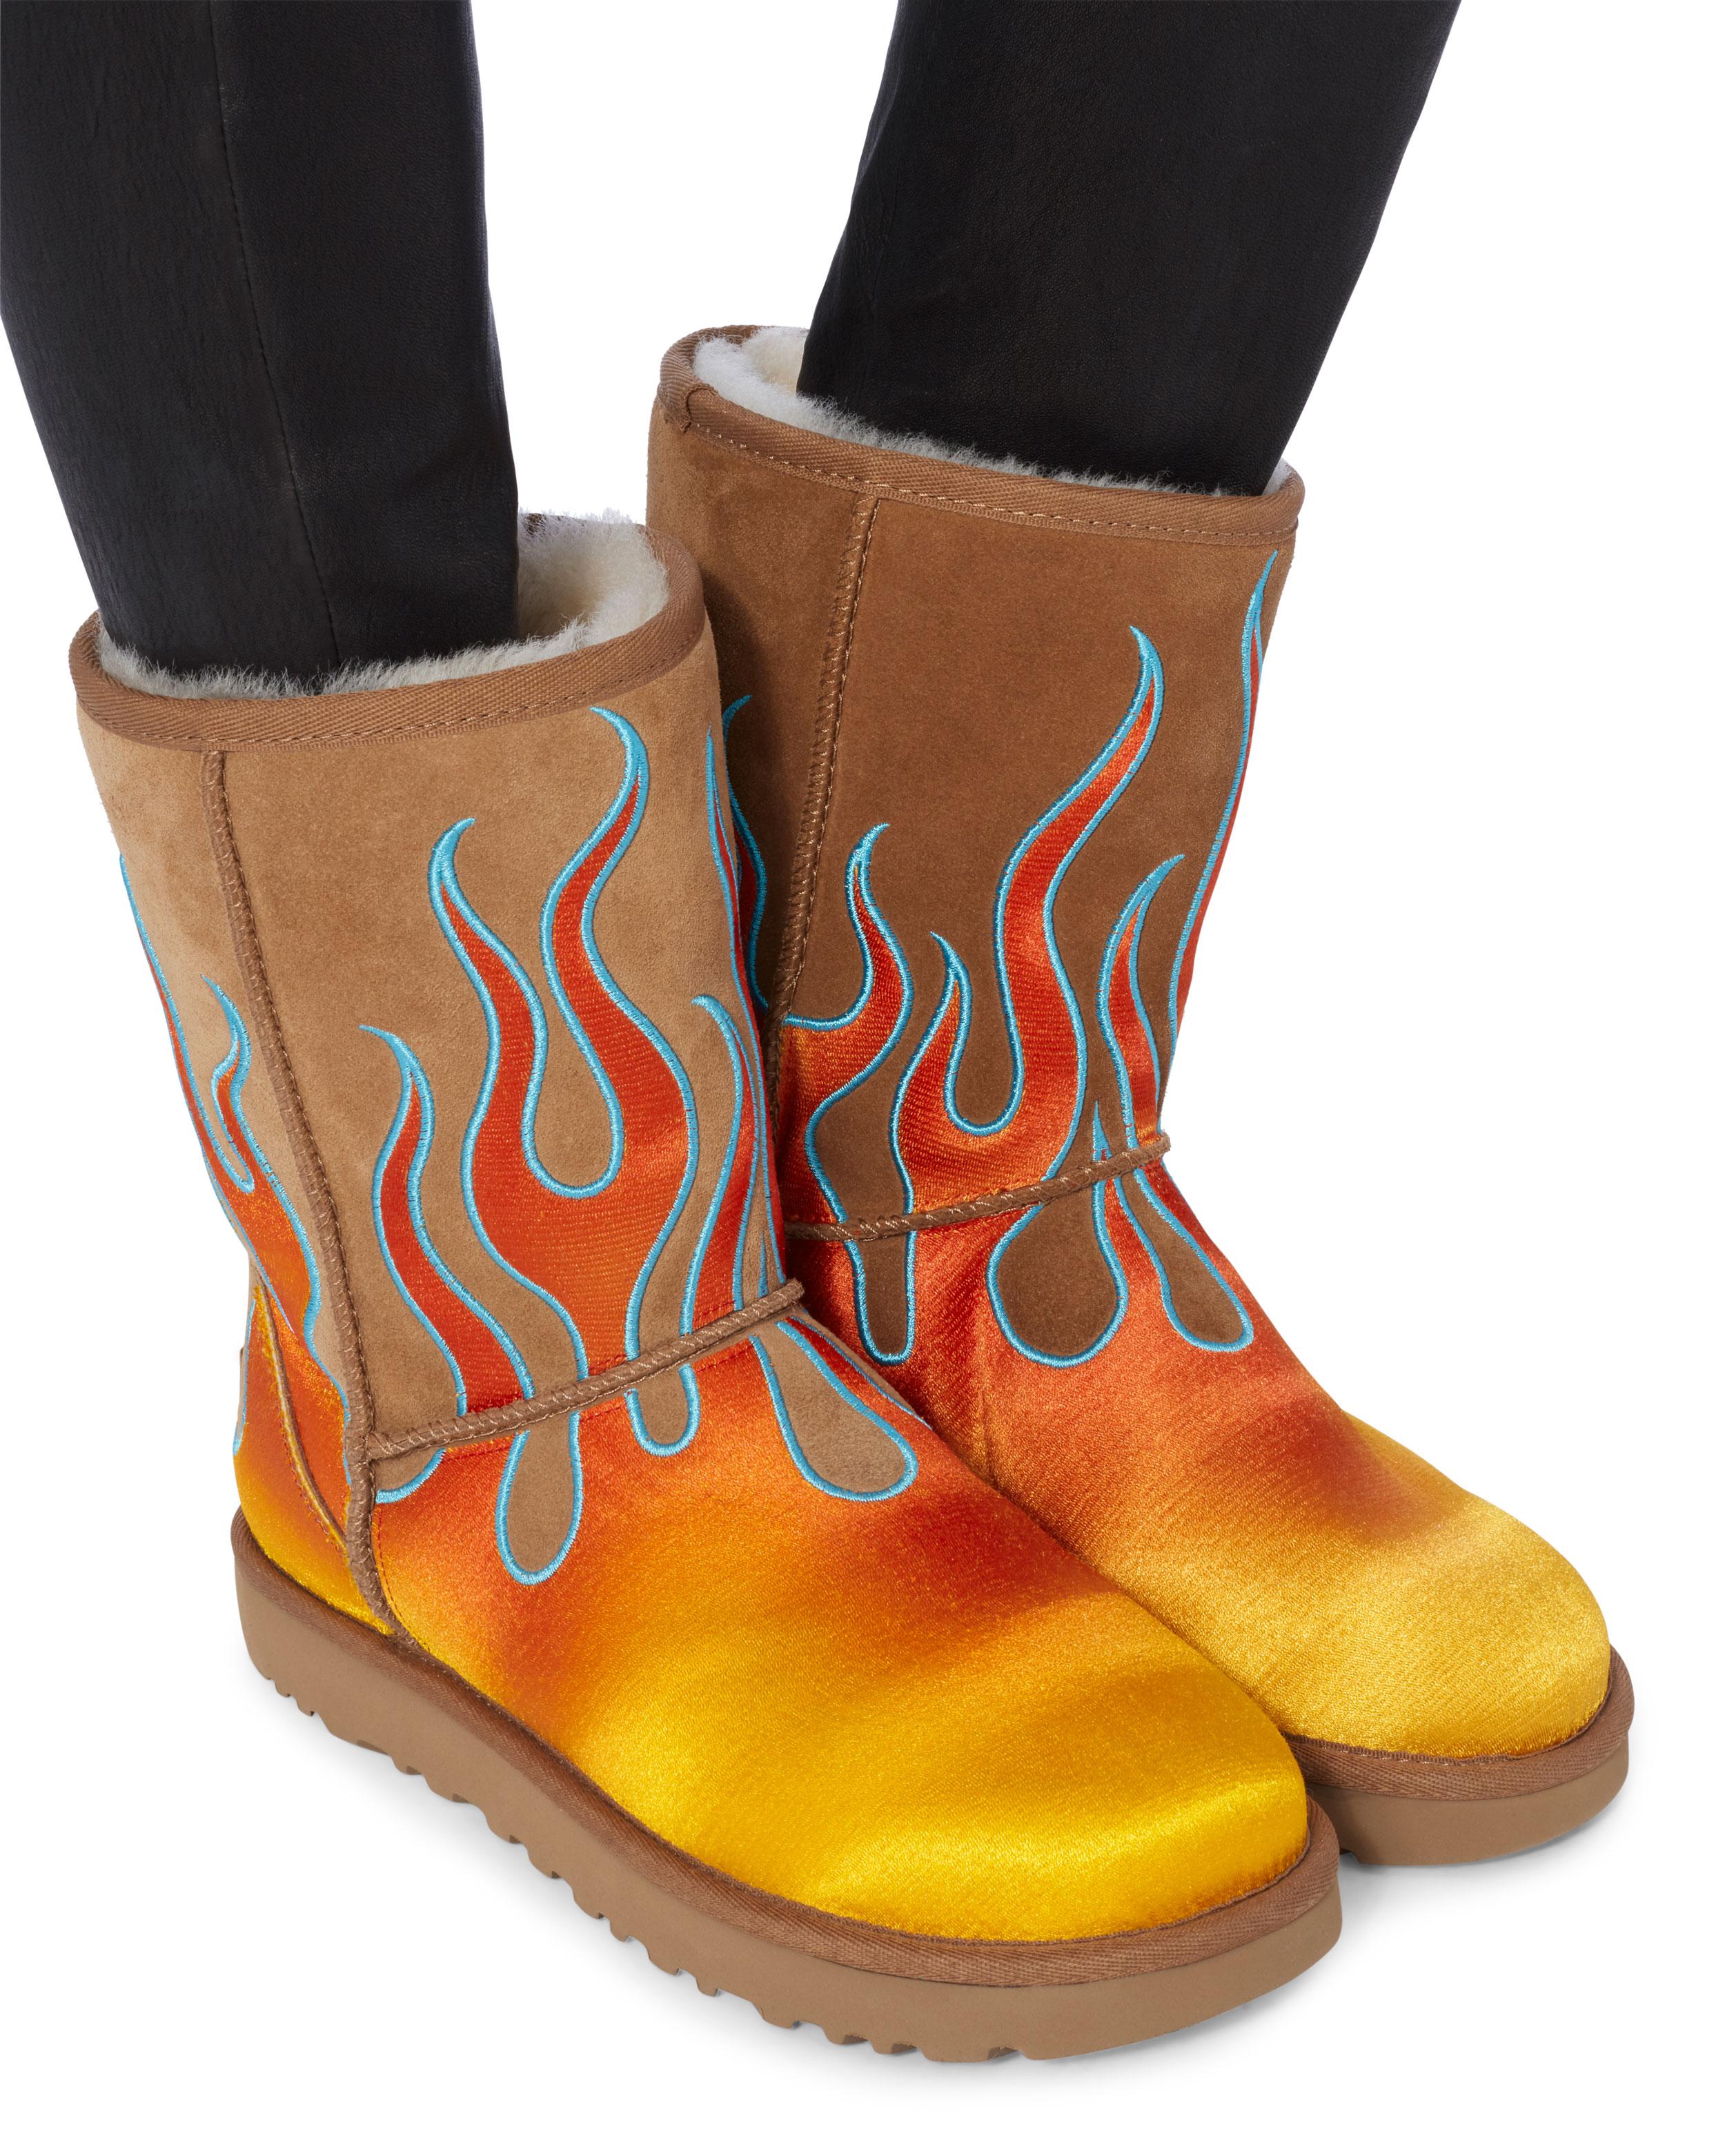 uggs with flames - alkemyinnovation 